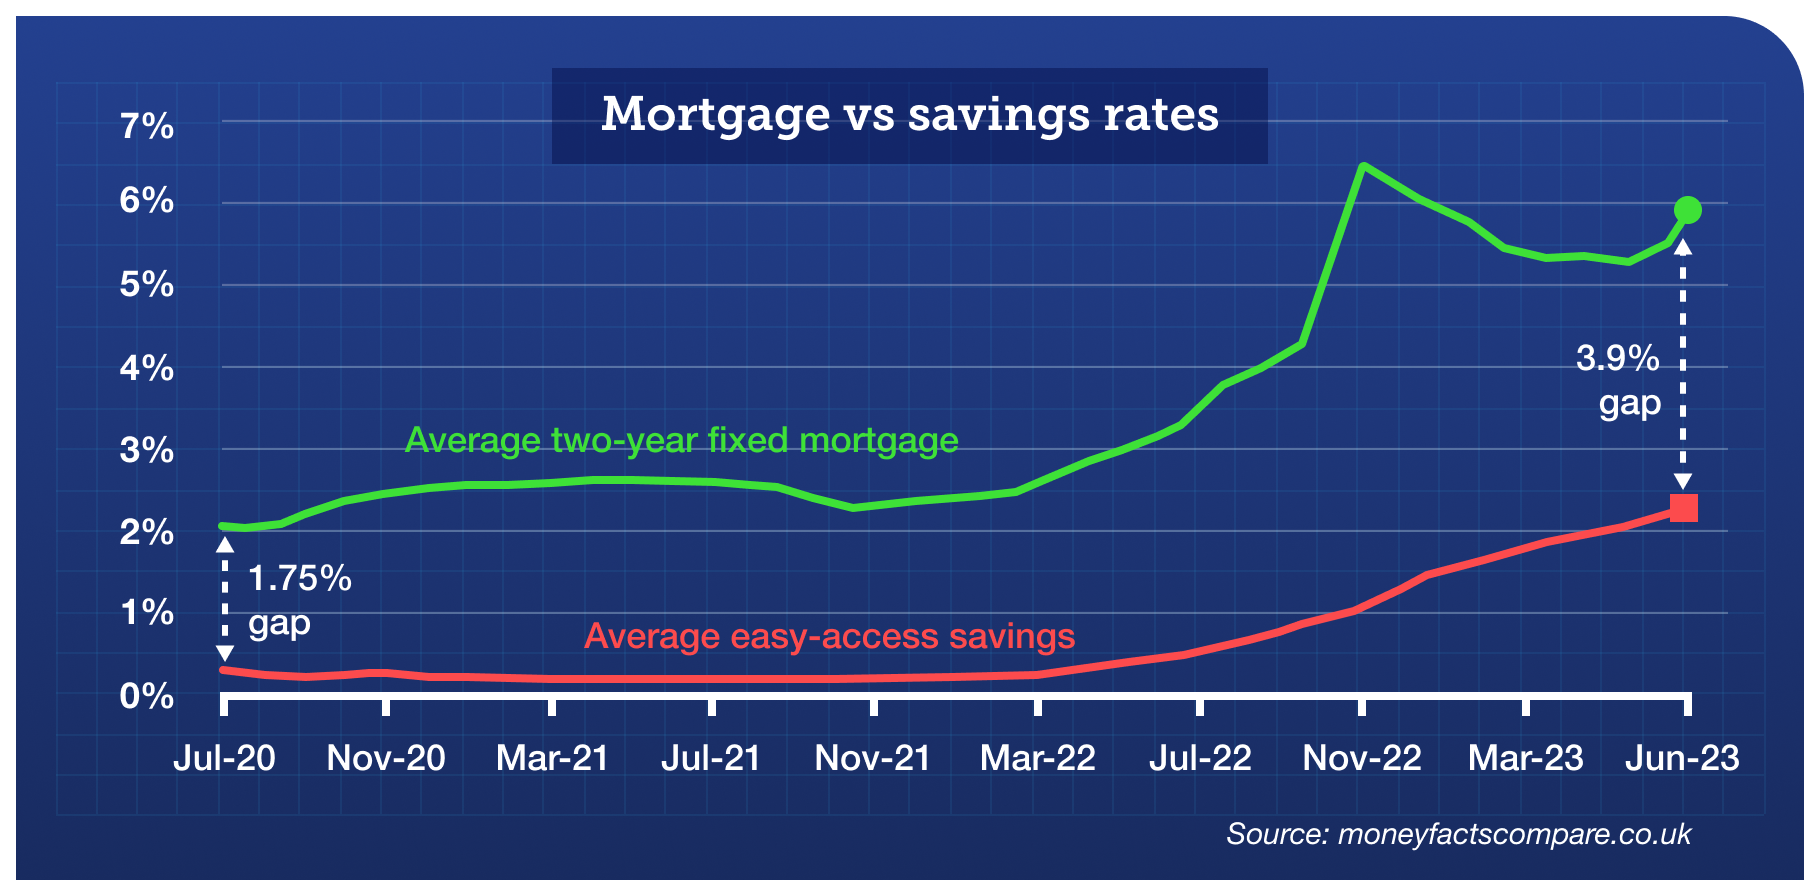 A graph showing the fluctuations of average two-year fixed mortgage rates and average easy-access savings rates between July 2020 and June 2023. The difference between the average two-year fixed mortgage rate and the average easy-access savings rate rose from 1.75% in July 2020 to 3.9% in June 2023.